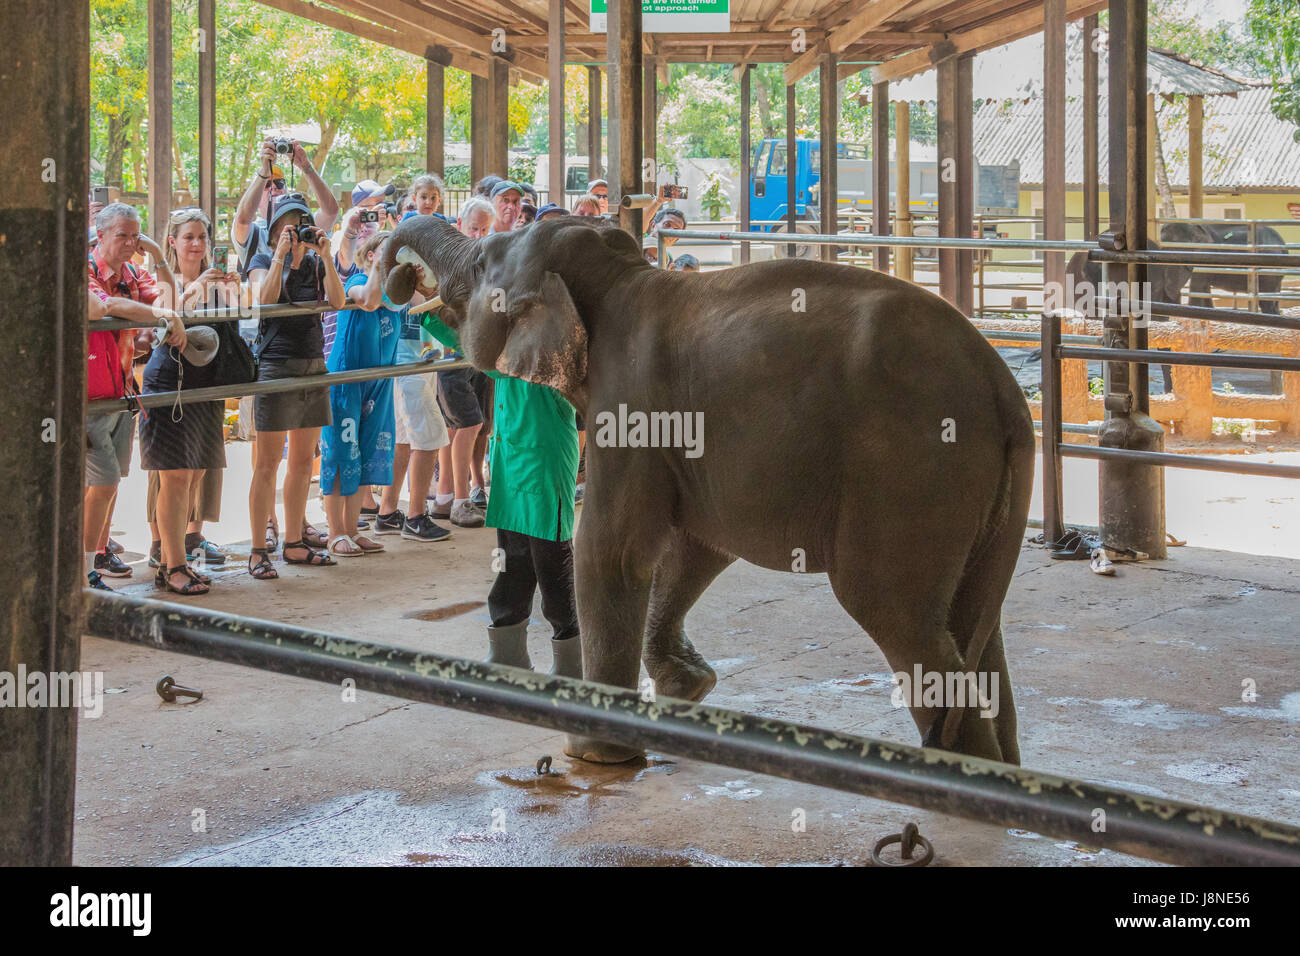 Editorial: PINNAWALA, SRI LANKA, April 7, 2017 - Elephant calf being fed in front of tourists, at the Pinnawala Elephant Orphanage Stock Photo